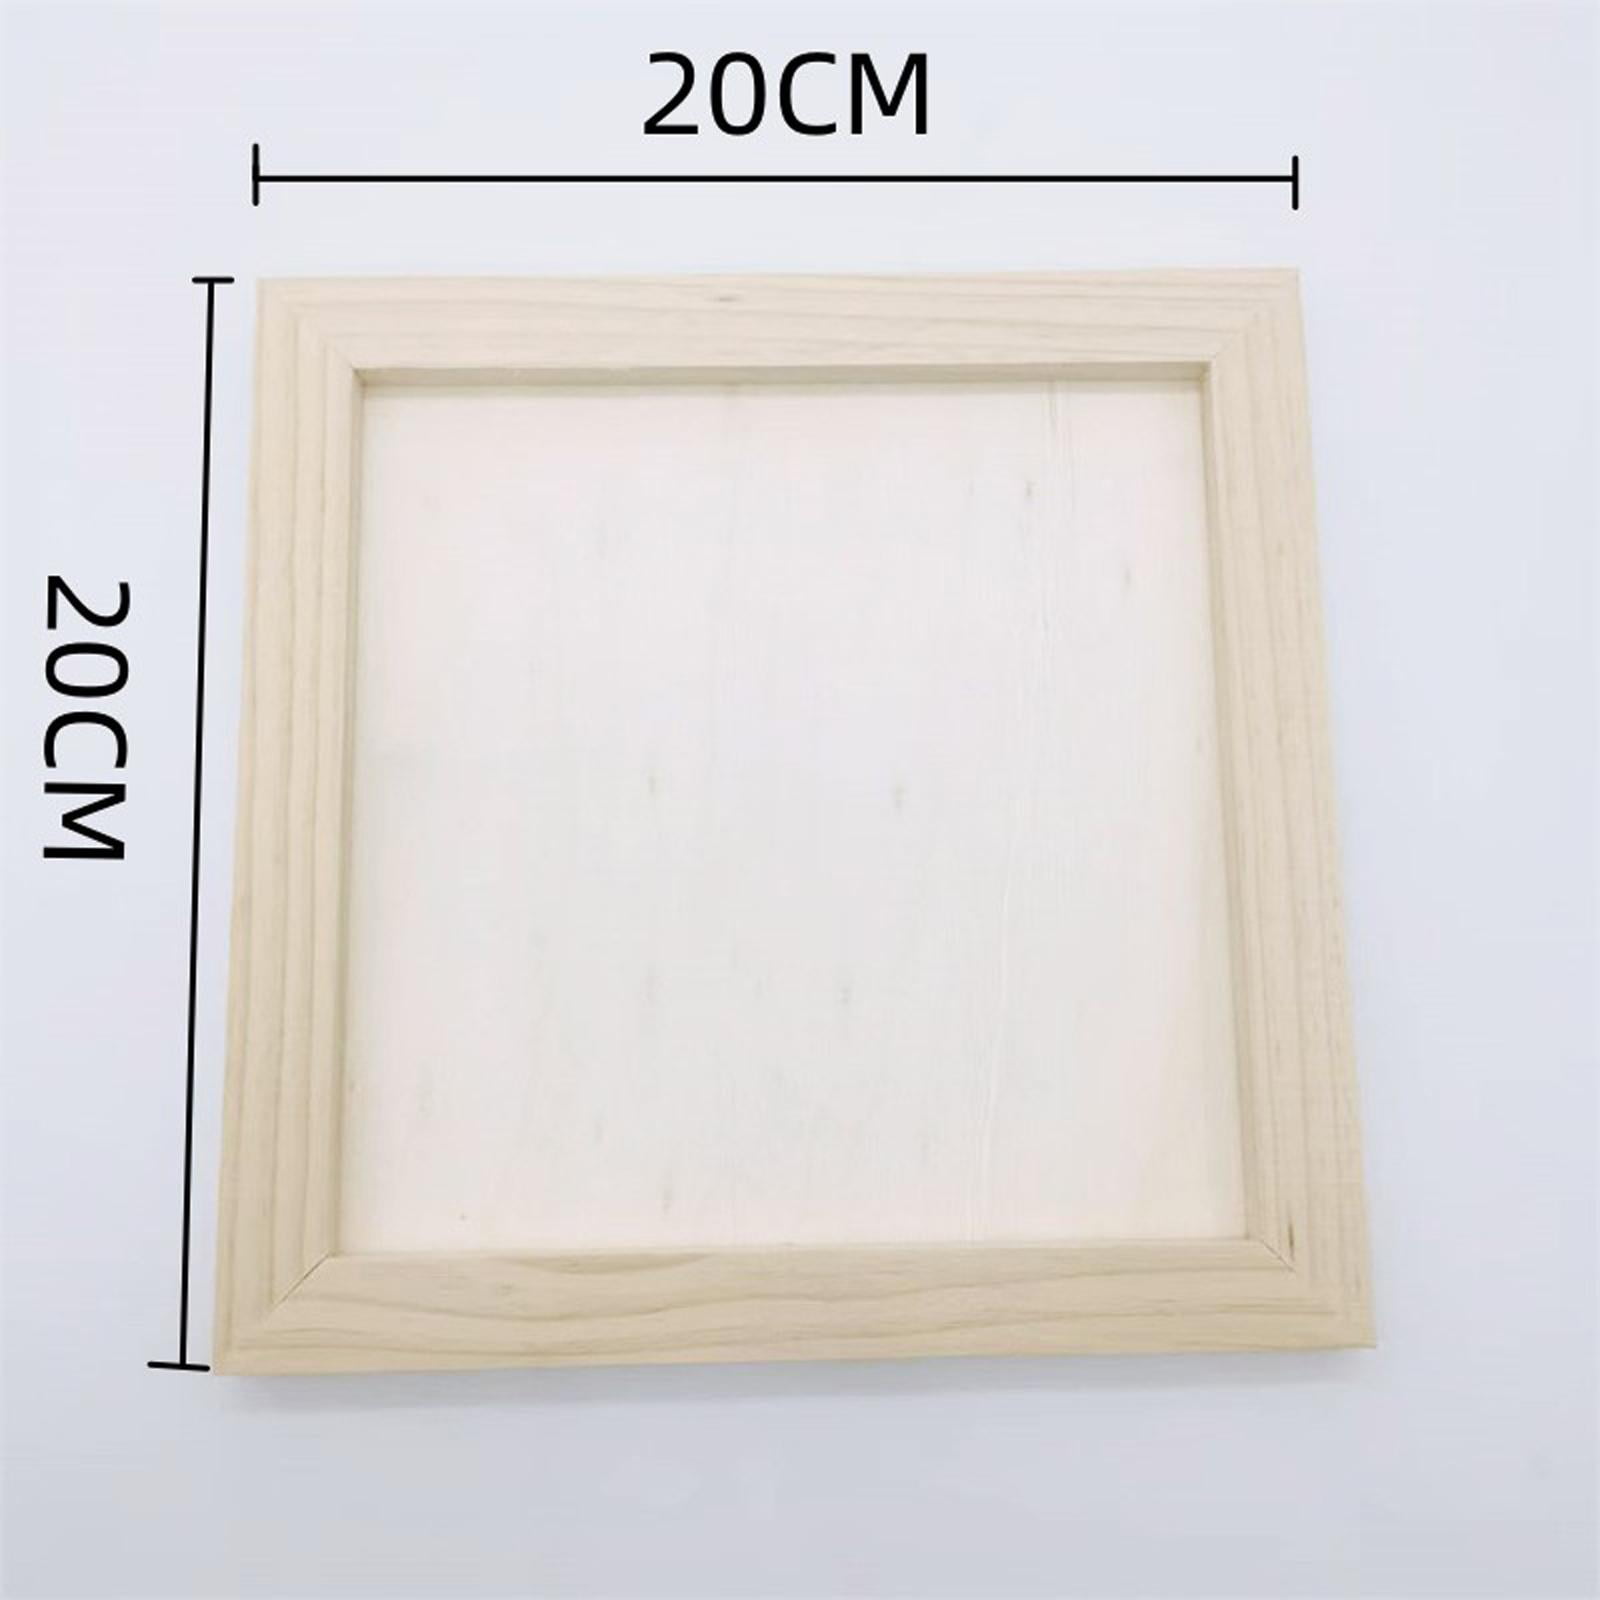 FL 002 S Wooden Photo Frame small - 15x20 cm - Funeral Products B.V.